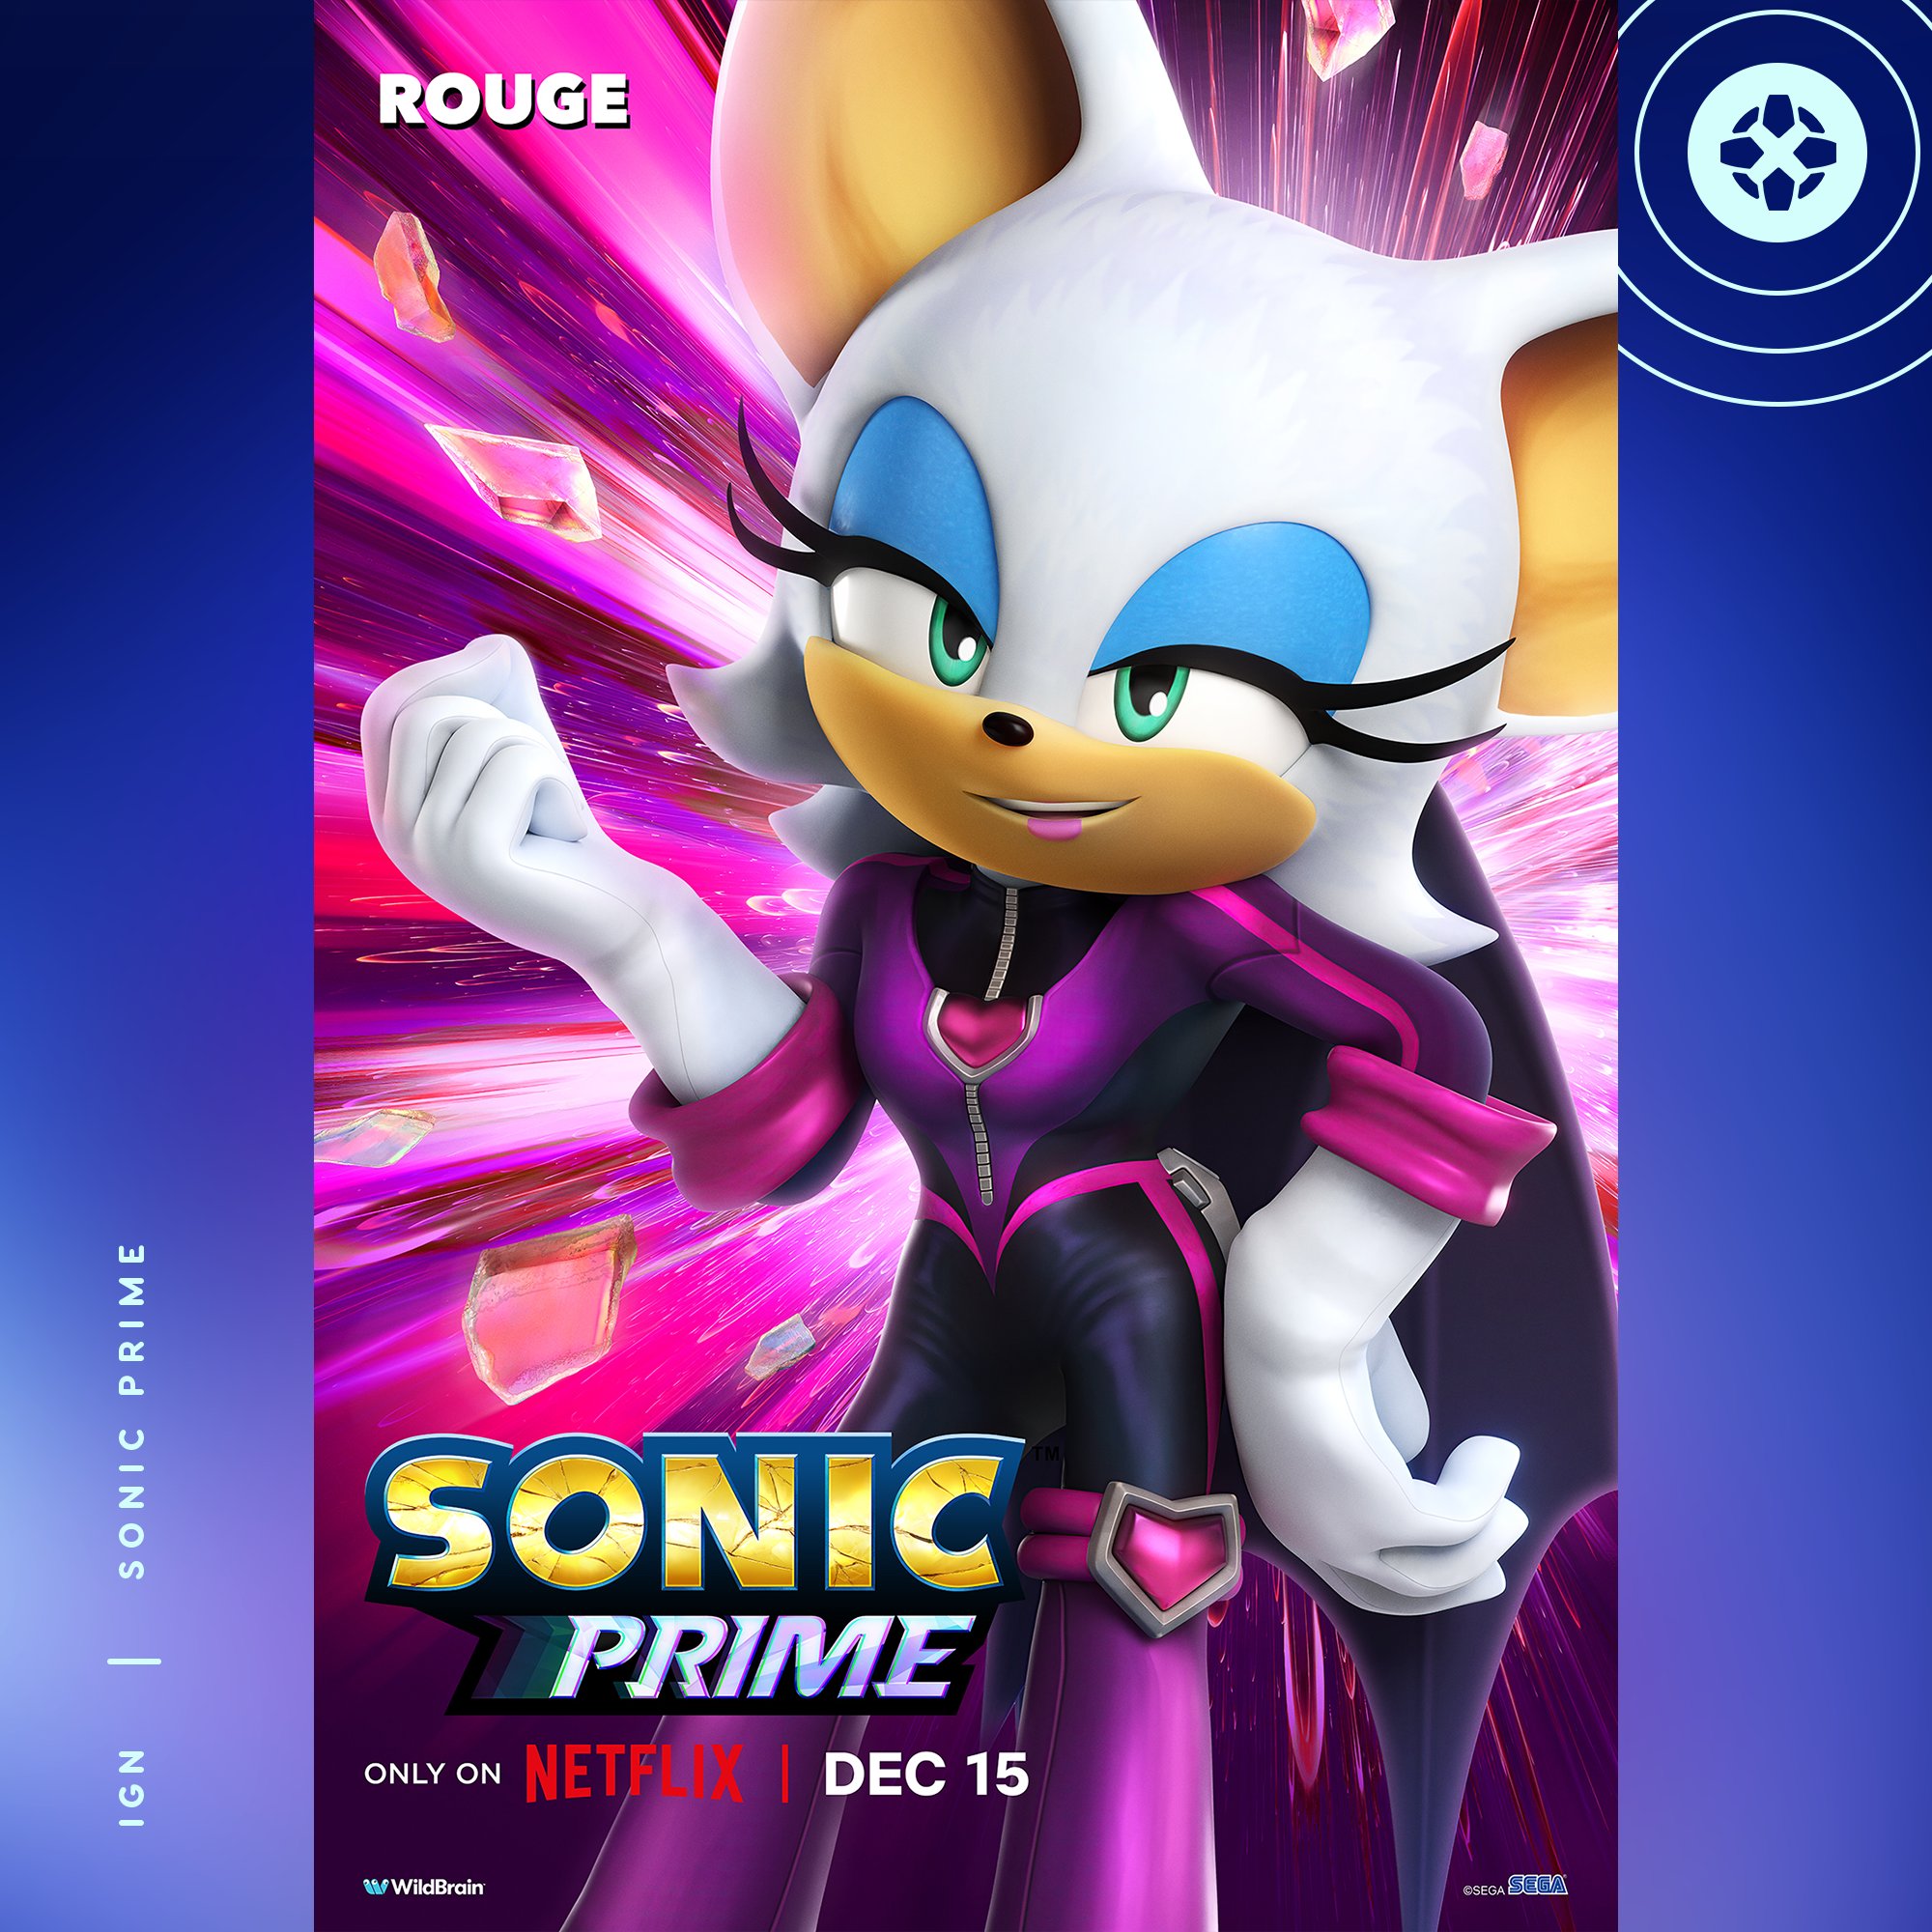 Sonic Prime' Season 2 Premiere Gets Early Release on